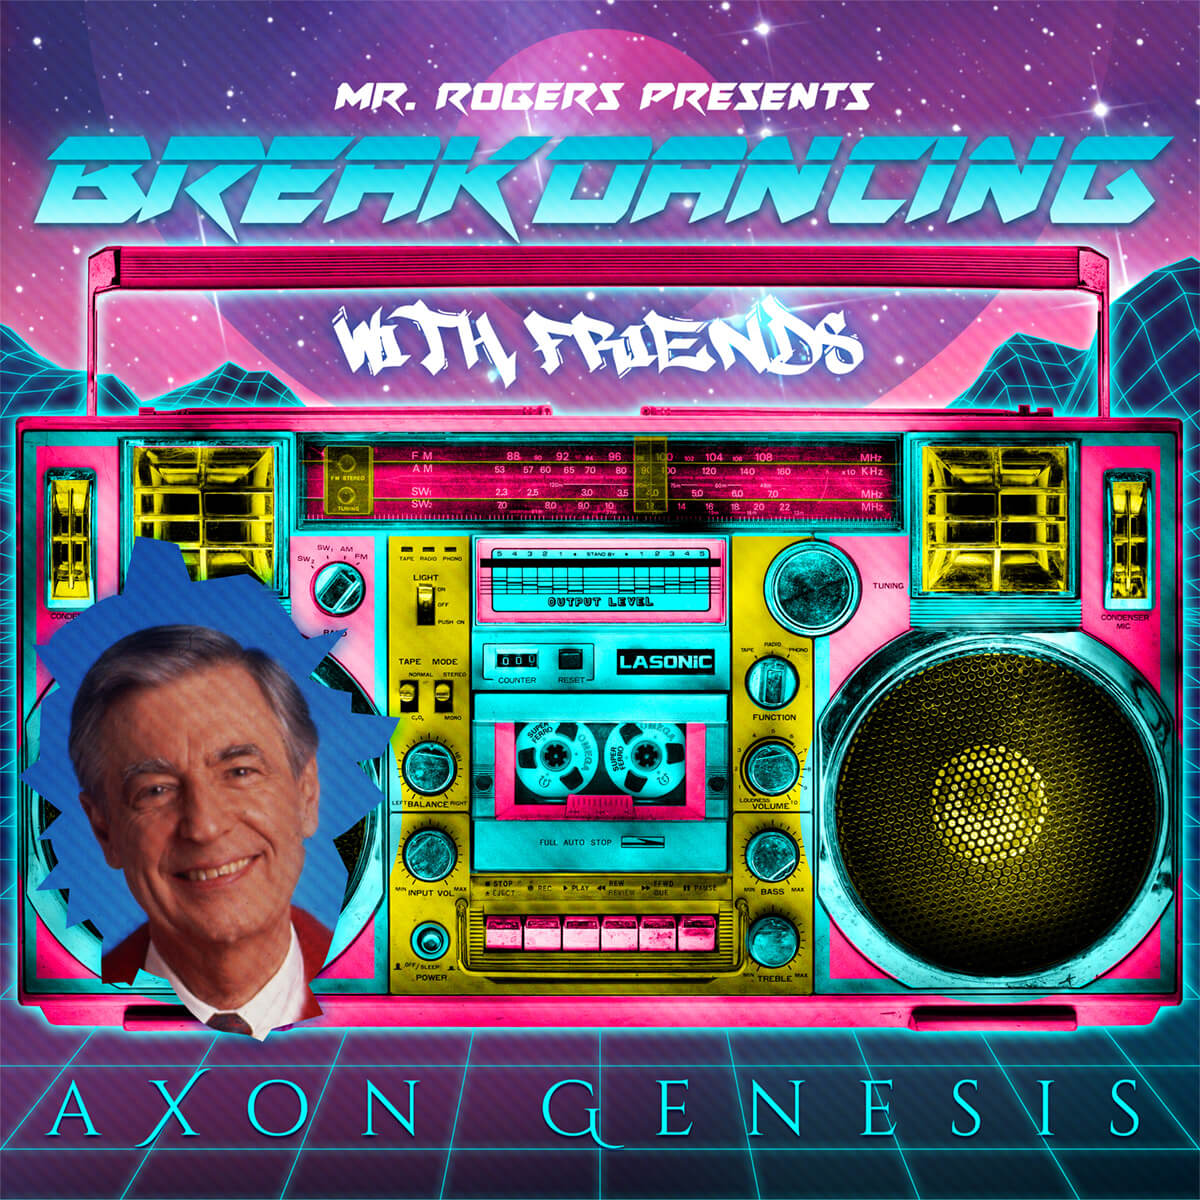 Breakdancing with Friends Music and Cover Art by Axon Genesis